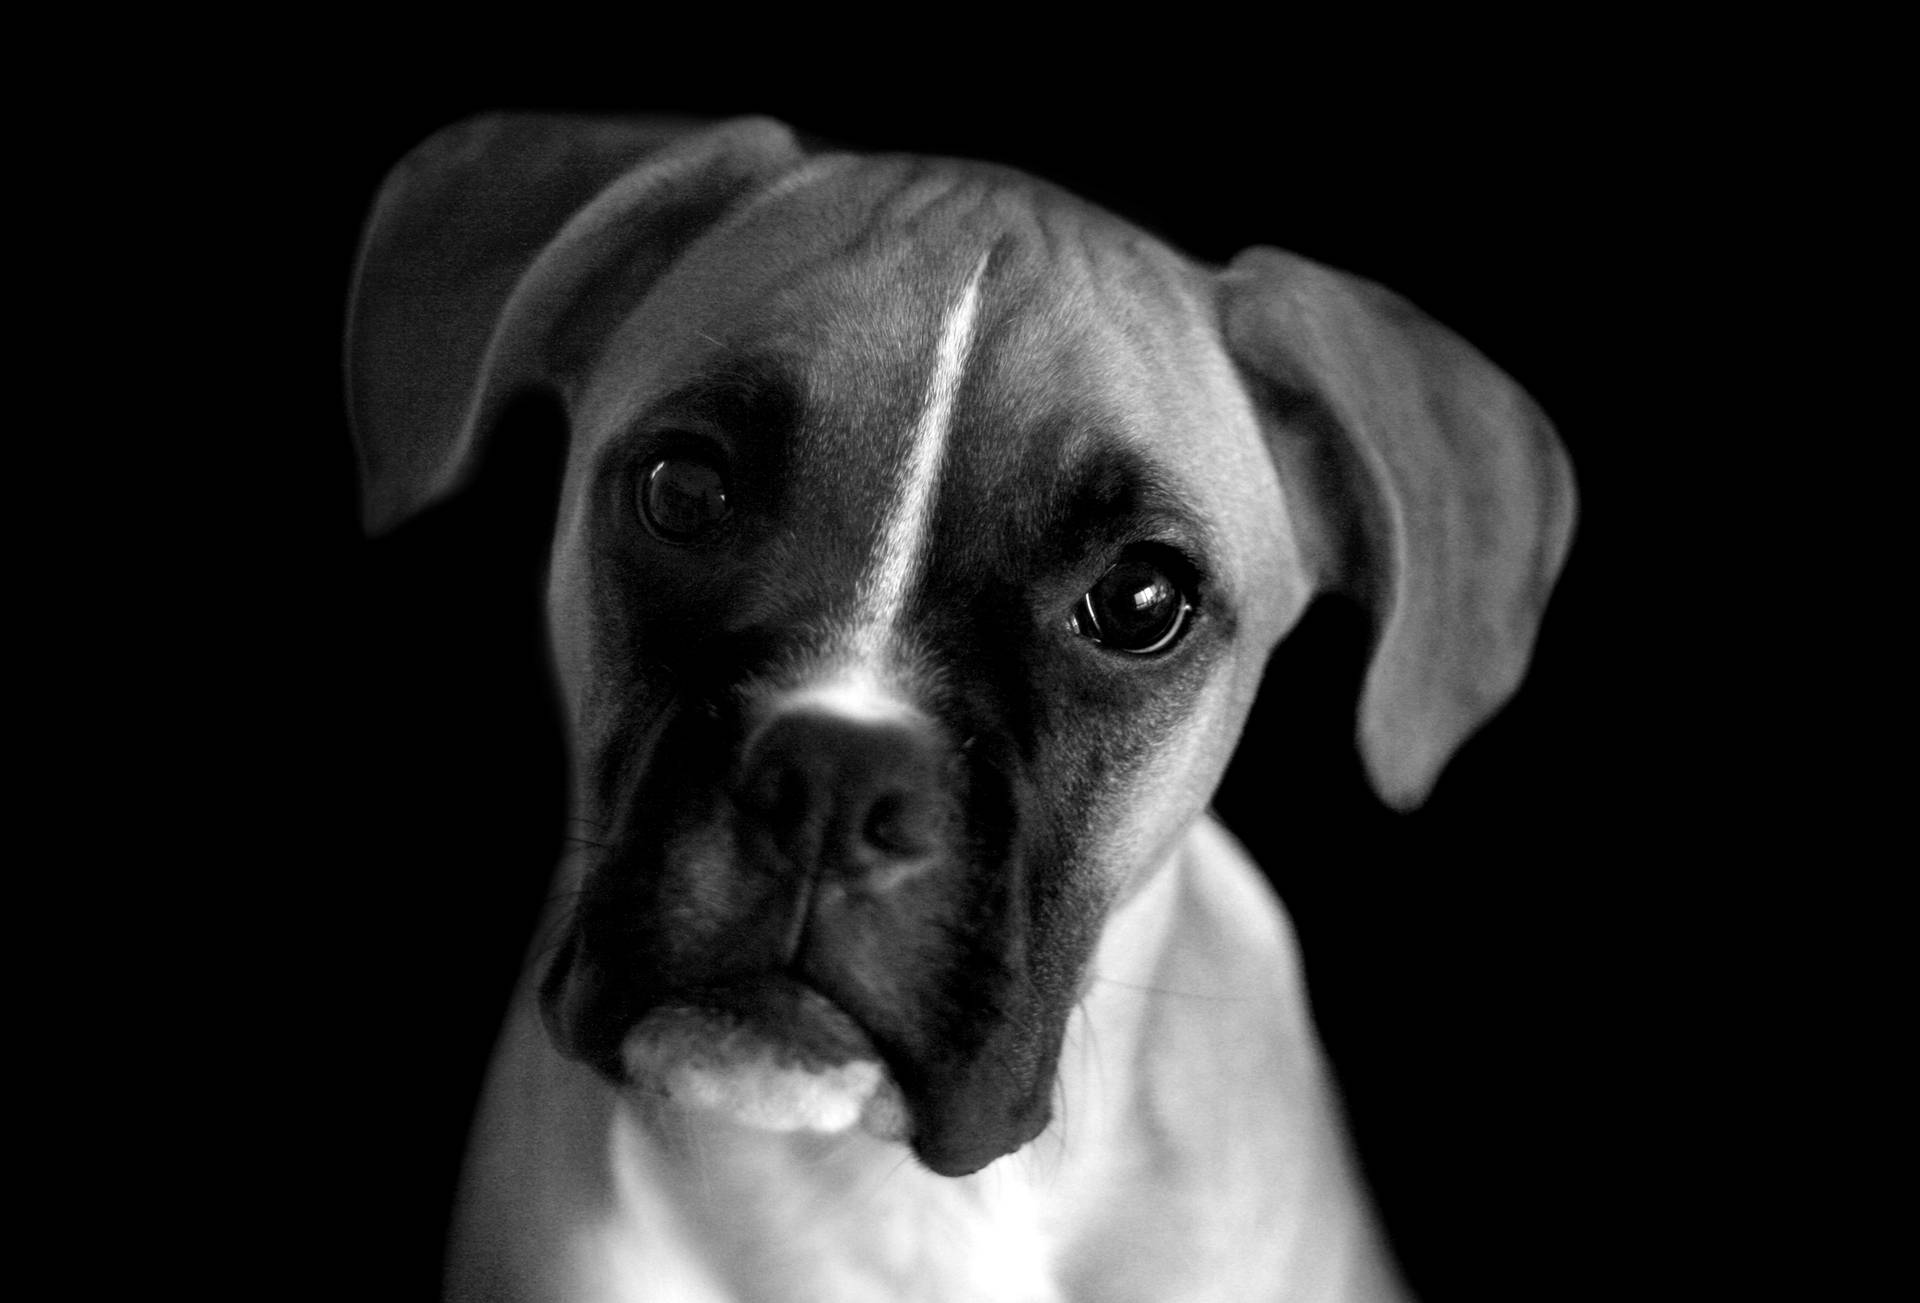 Black And White Dog With Puppy Eyes Wallpaper